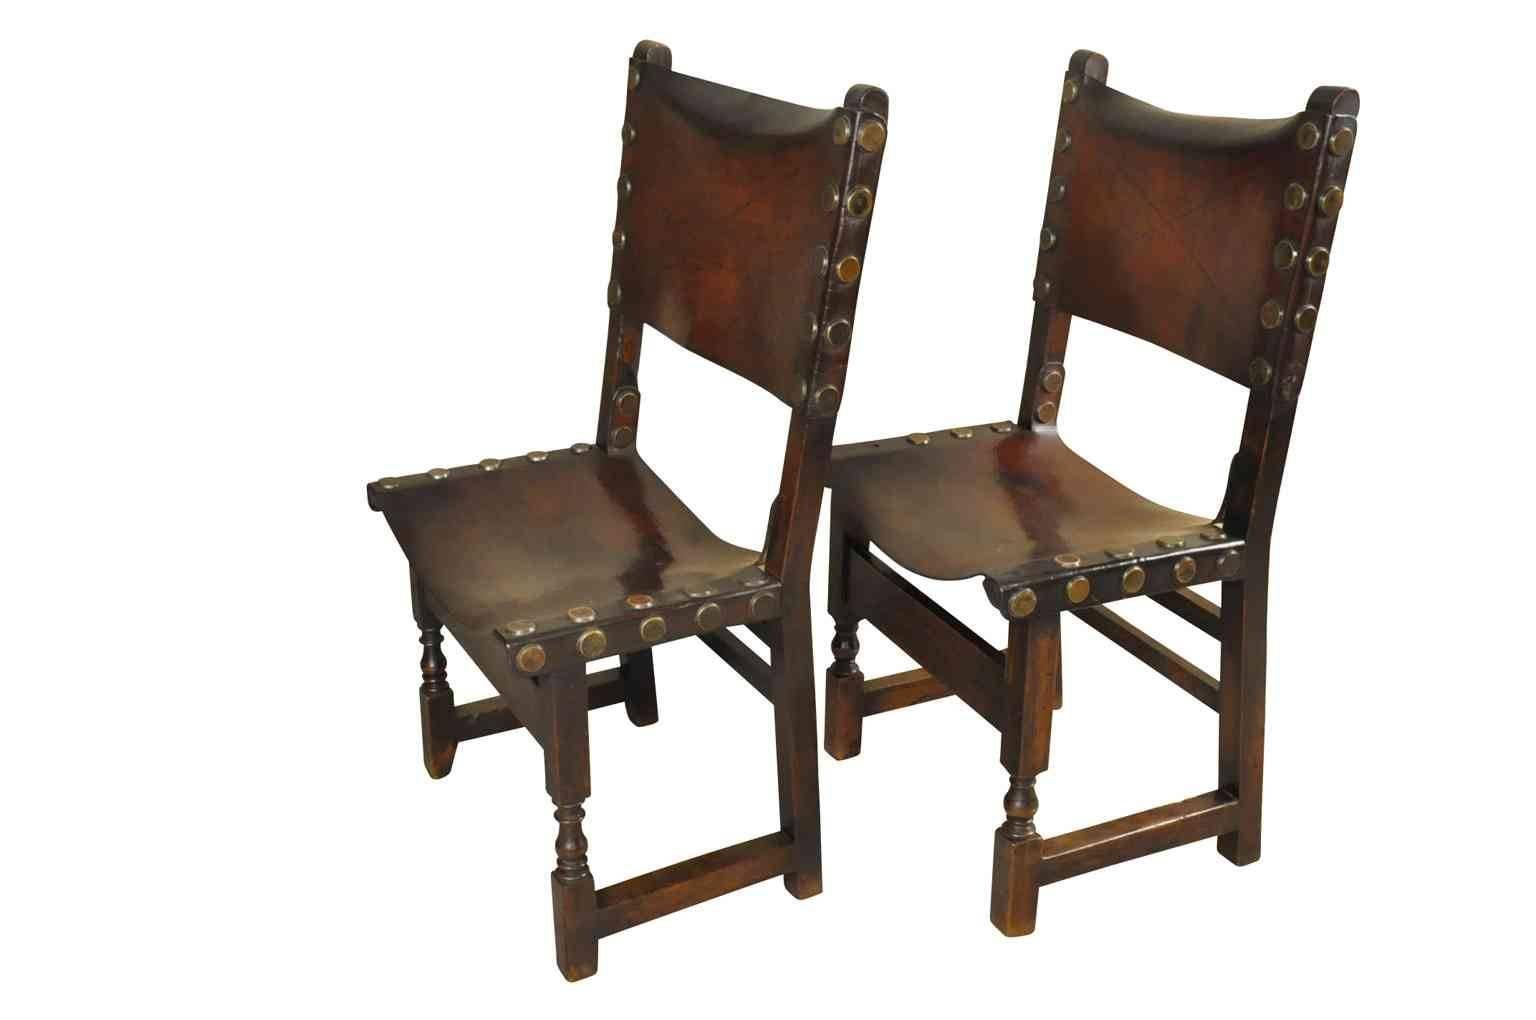 A very handsome pair of 17th century Spanish chairs in walnut and leather. Wonderful nail heads adorn the beautifully patinated leather. Very sound and sturdy.